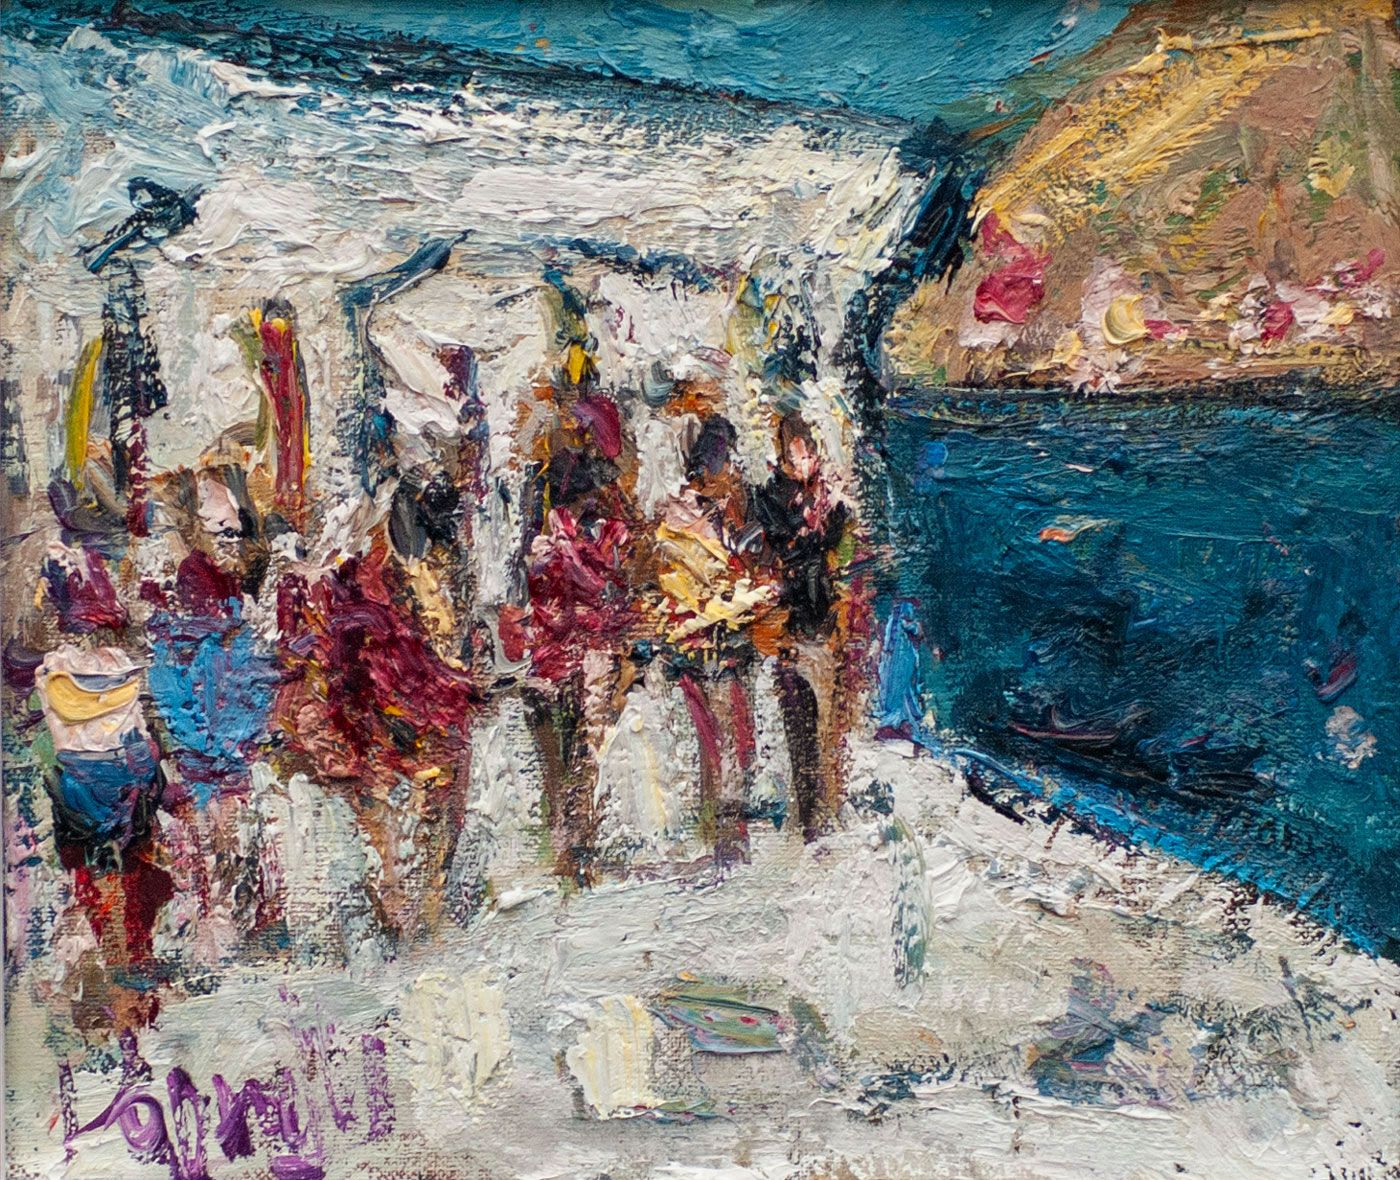 Deborah Donnelly - Swimmers in Sandycove